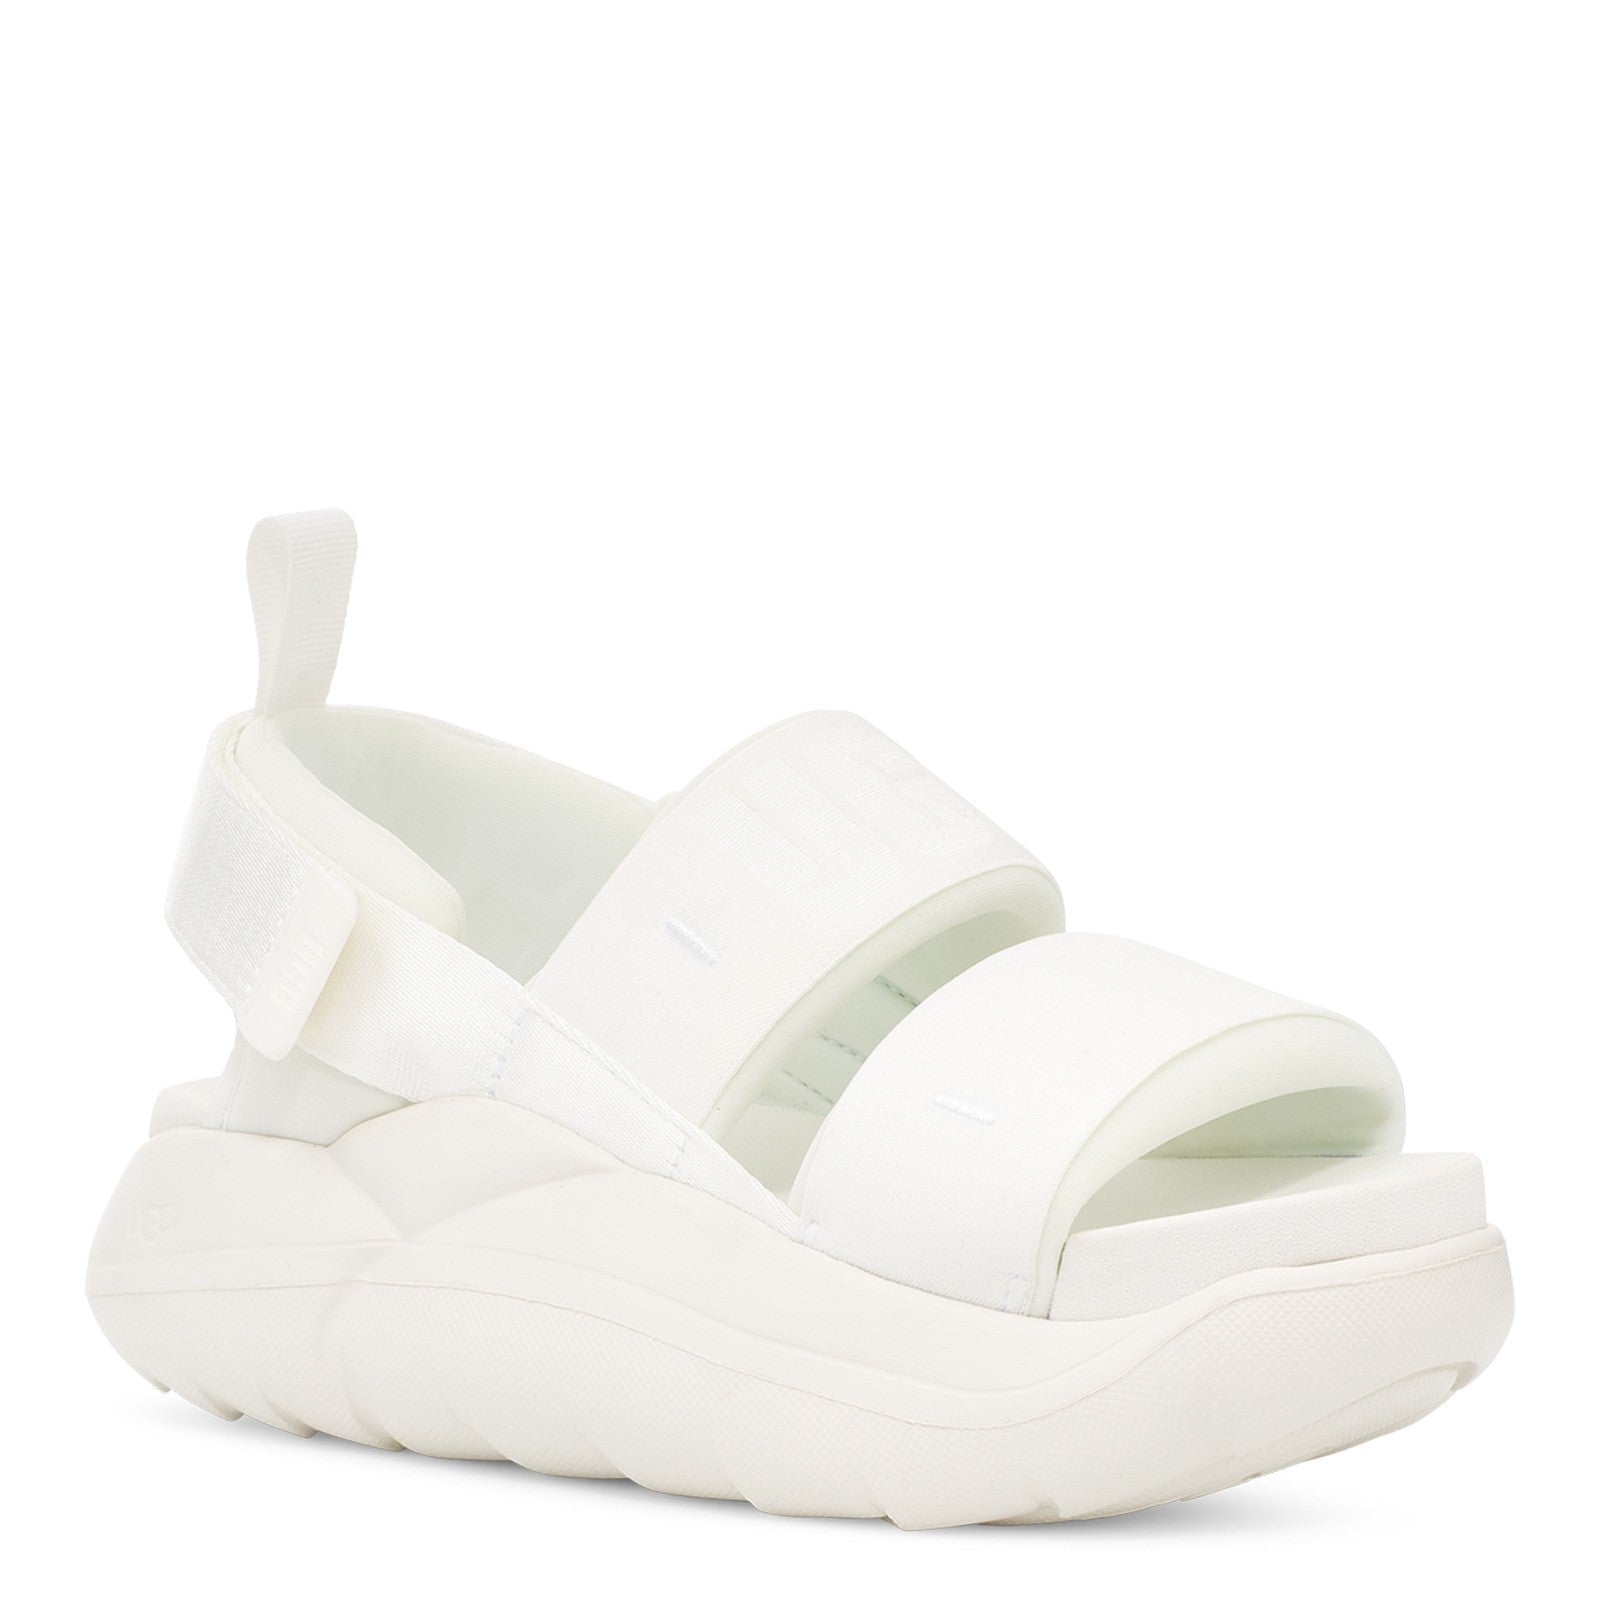 Front angle view of the Women's LA Cloud Sport sandal by UGG in the color white